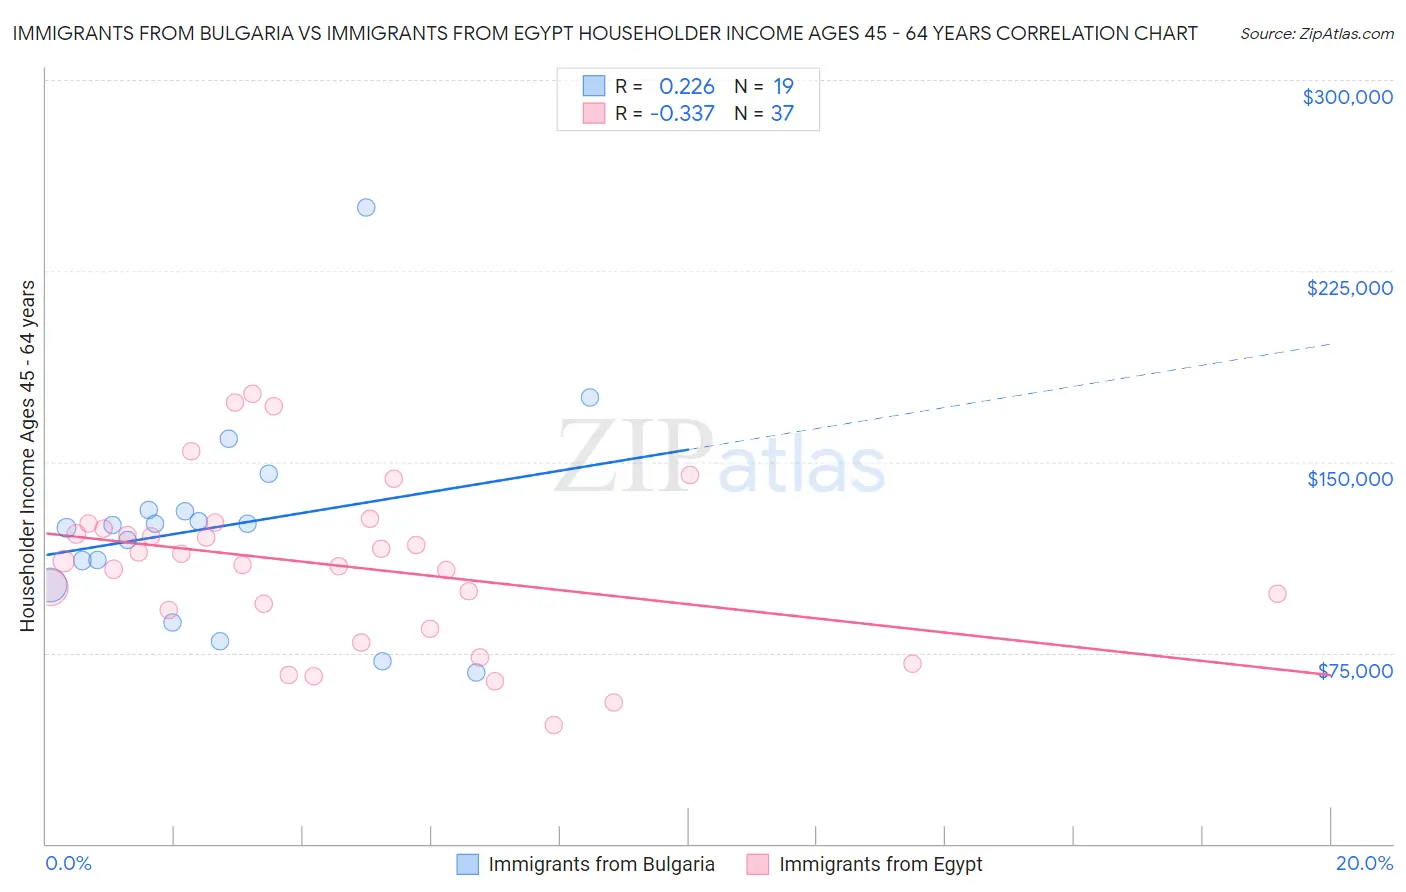 Immigrants from Bulgaria vs Immigrants from Egypt Householder Income Ages 45 - 64 years